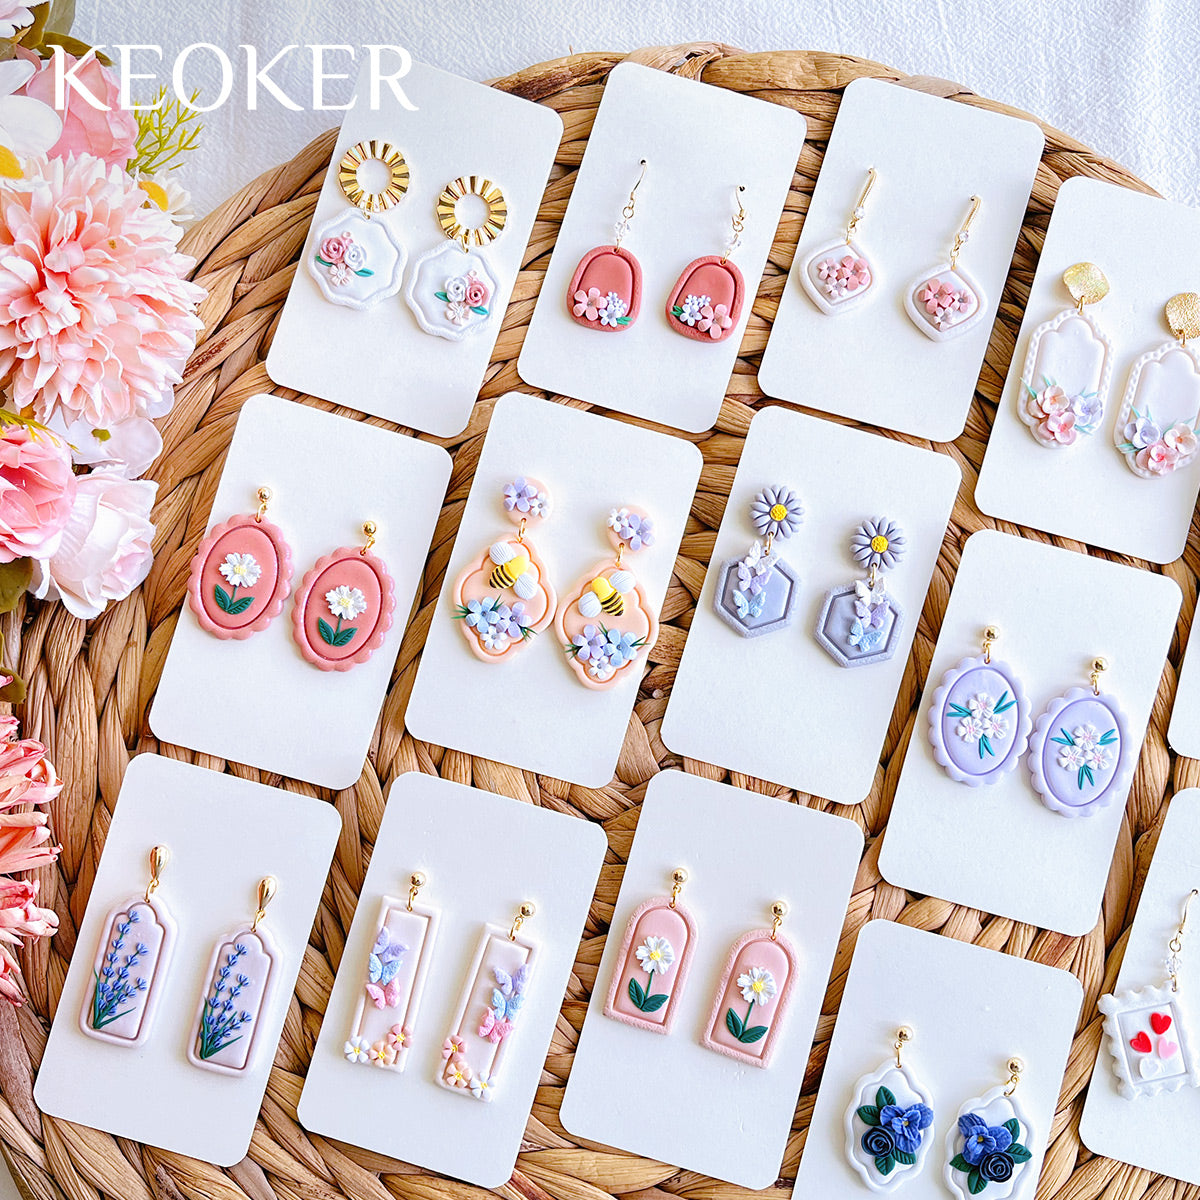 KEOKER Spring Floral Polymer Clay Cutters(12 Shapes)